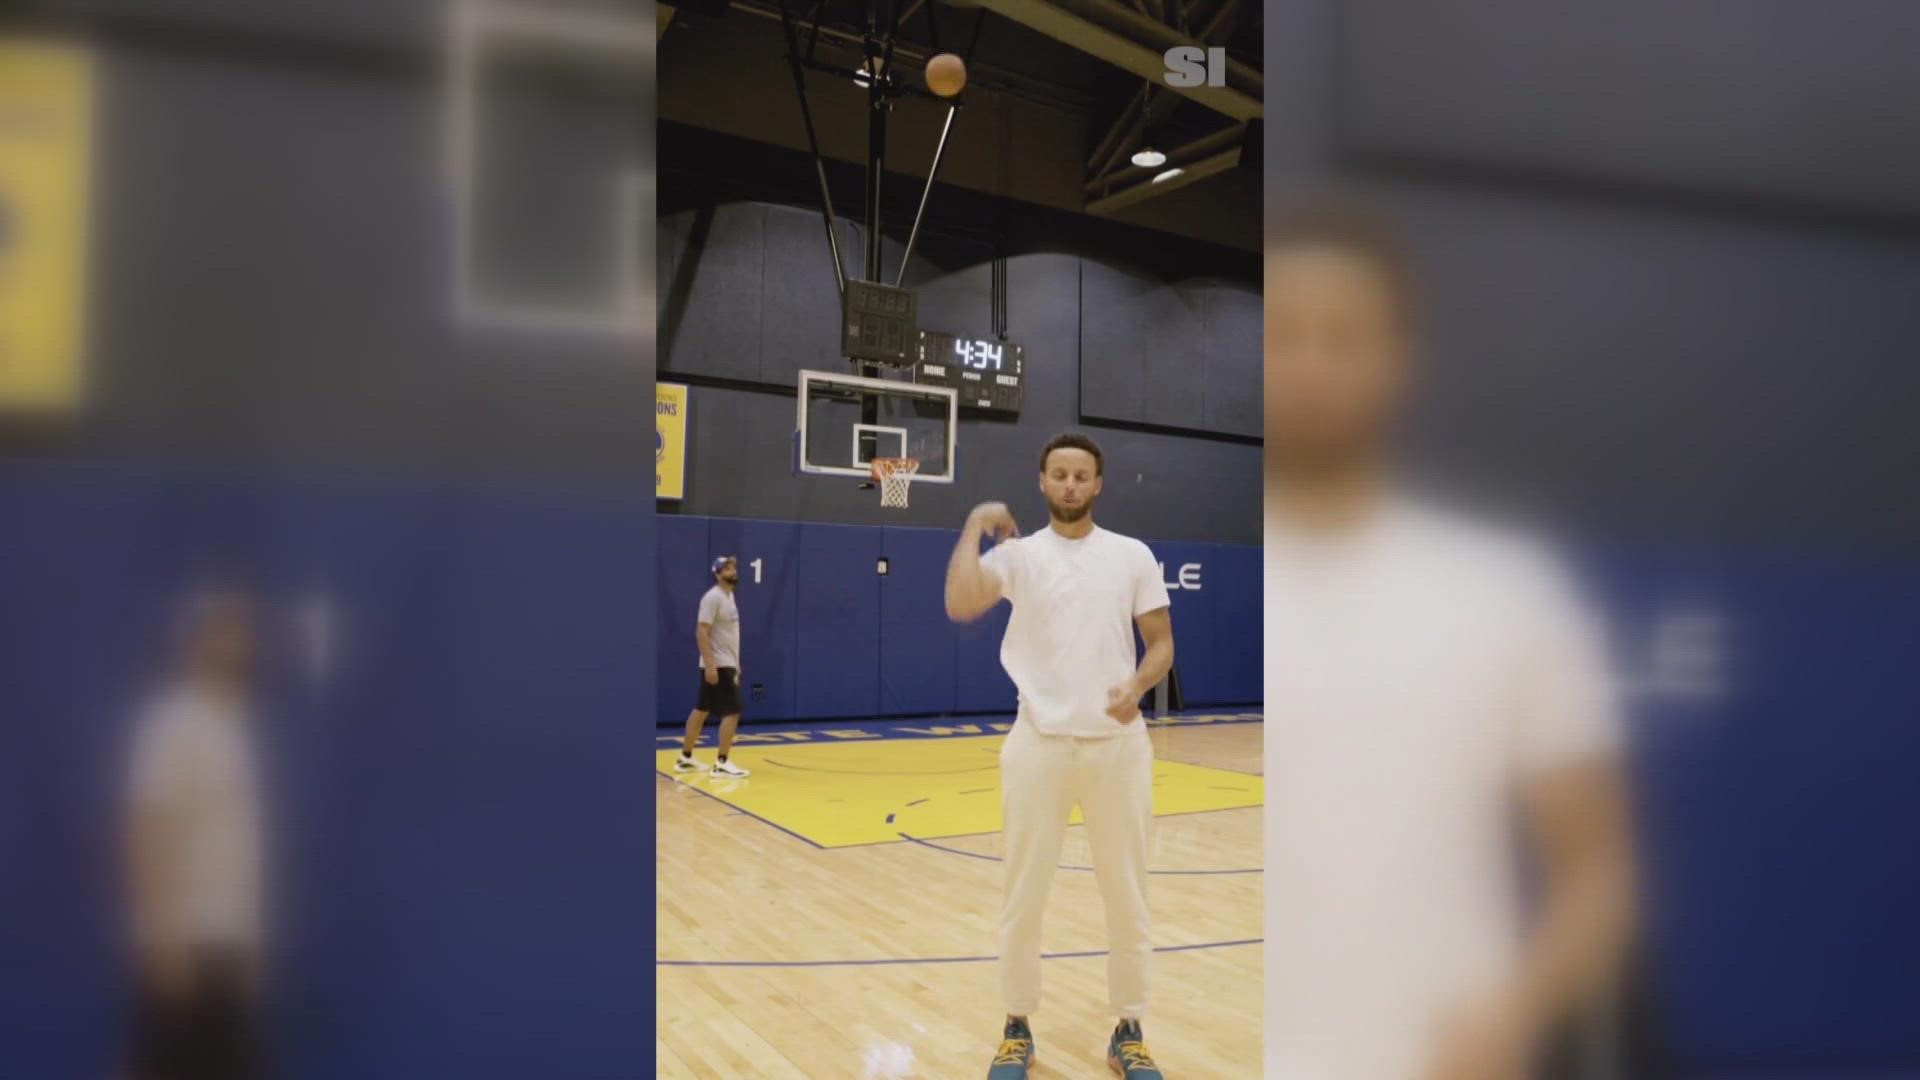 Another video of Curry's trick shots was confirmed to be edited, so people now wonder if this one also has some movie-like magic.